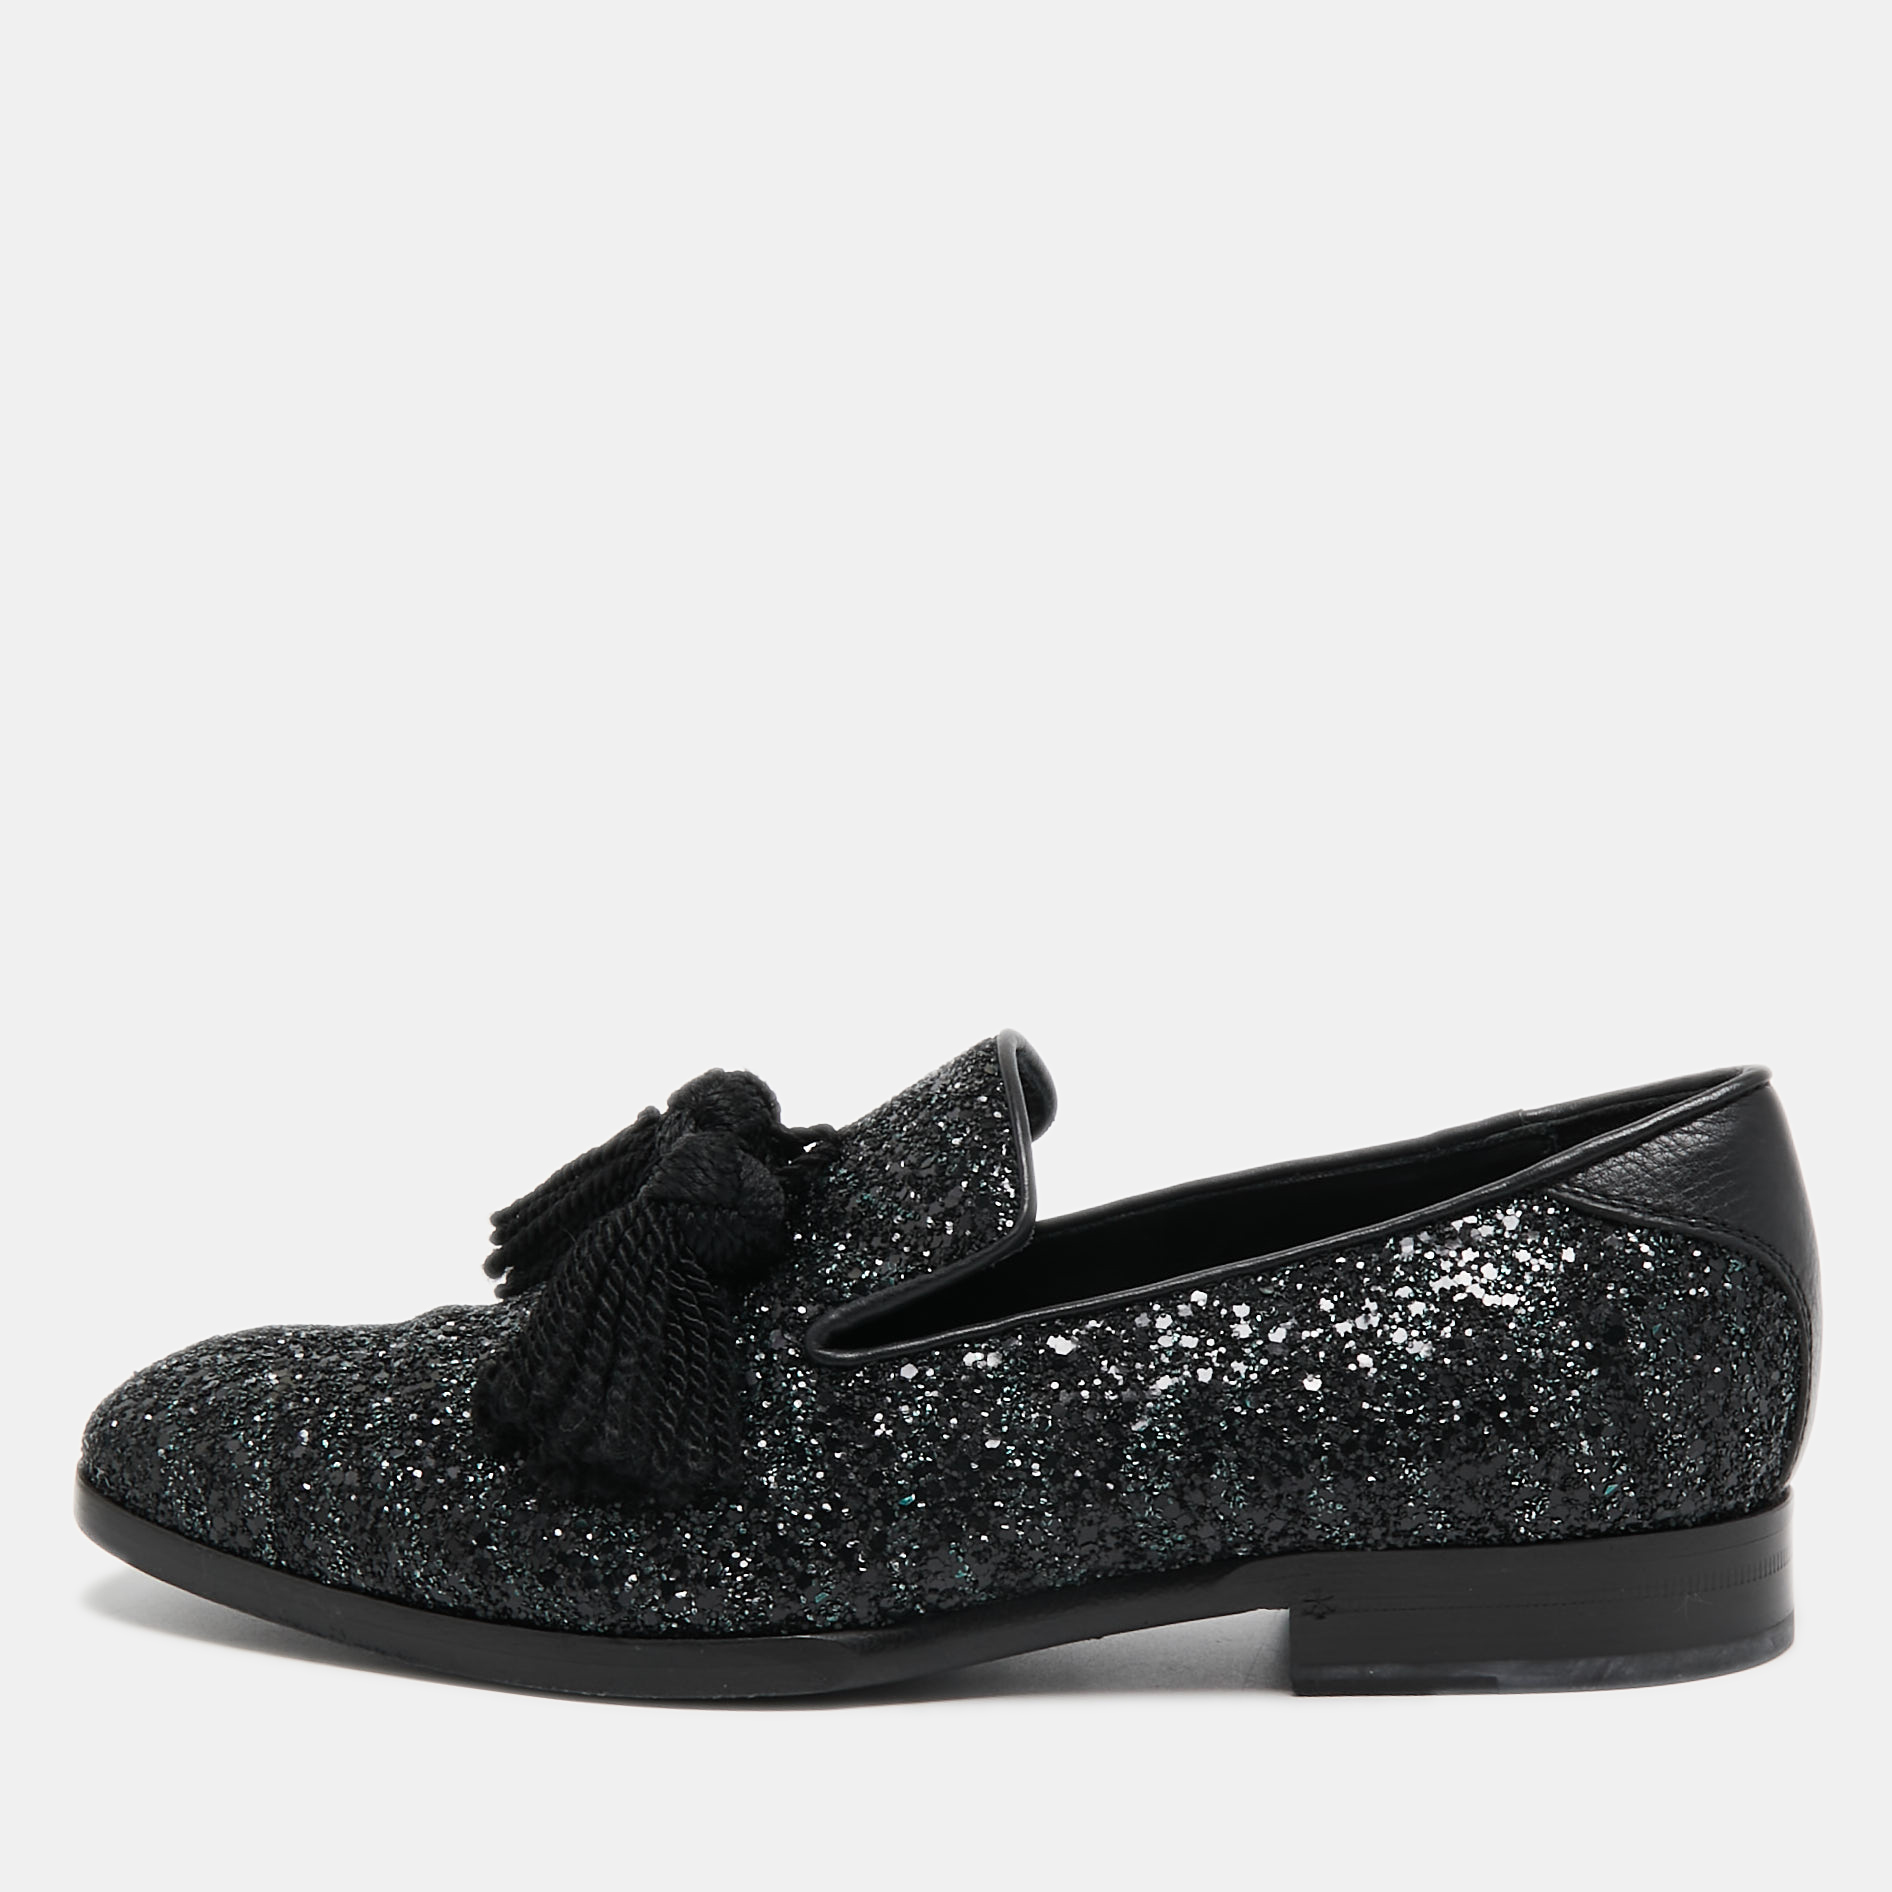 Pre-owned Jimmy Choo Black Coarse Glitter Foxley Smoking Slippers Size 39